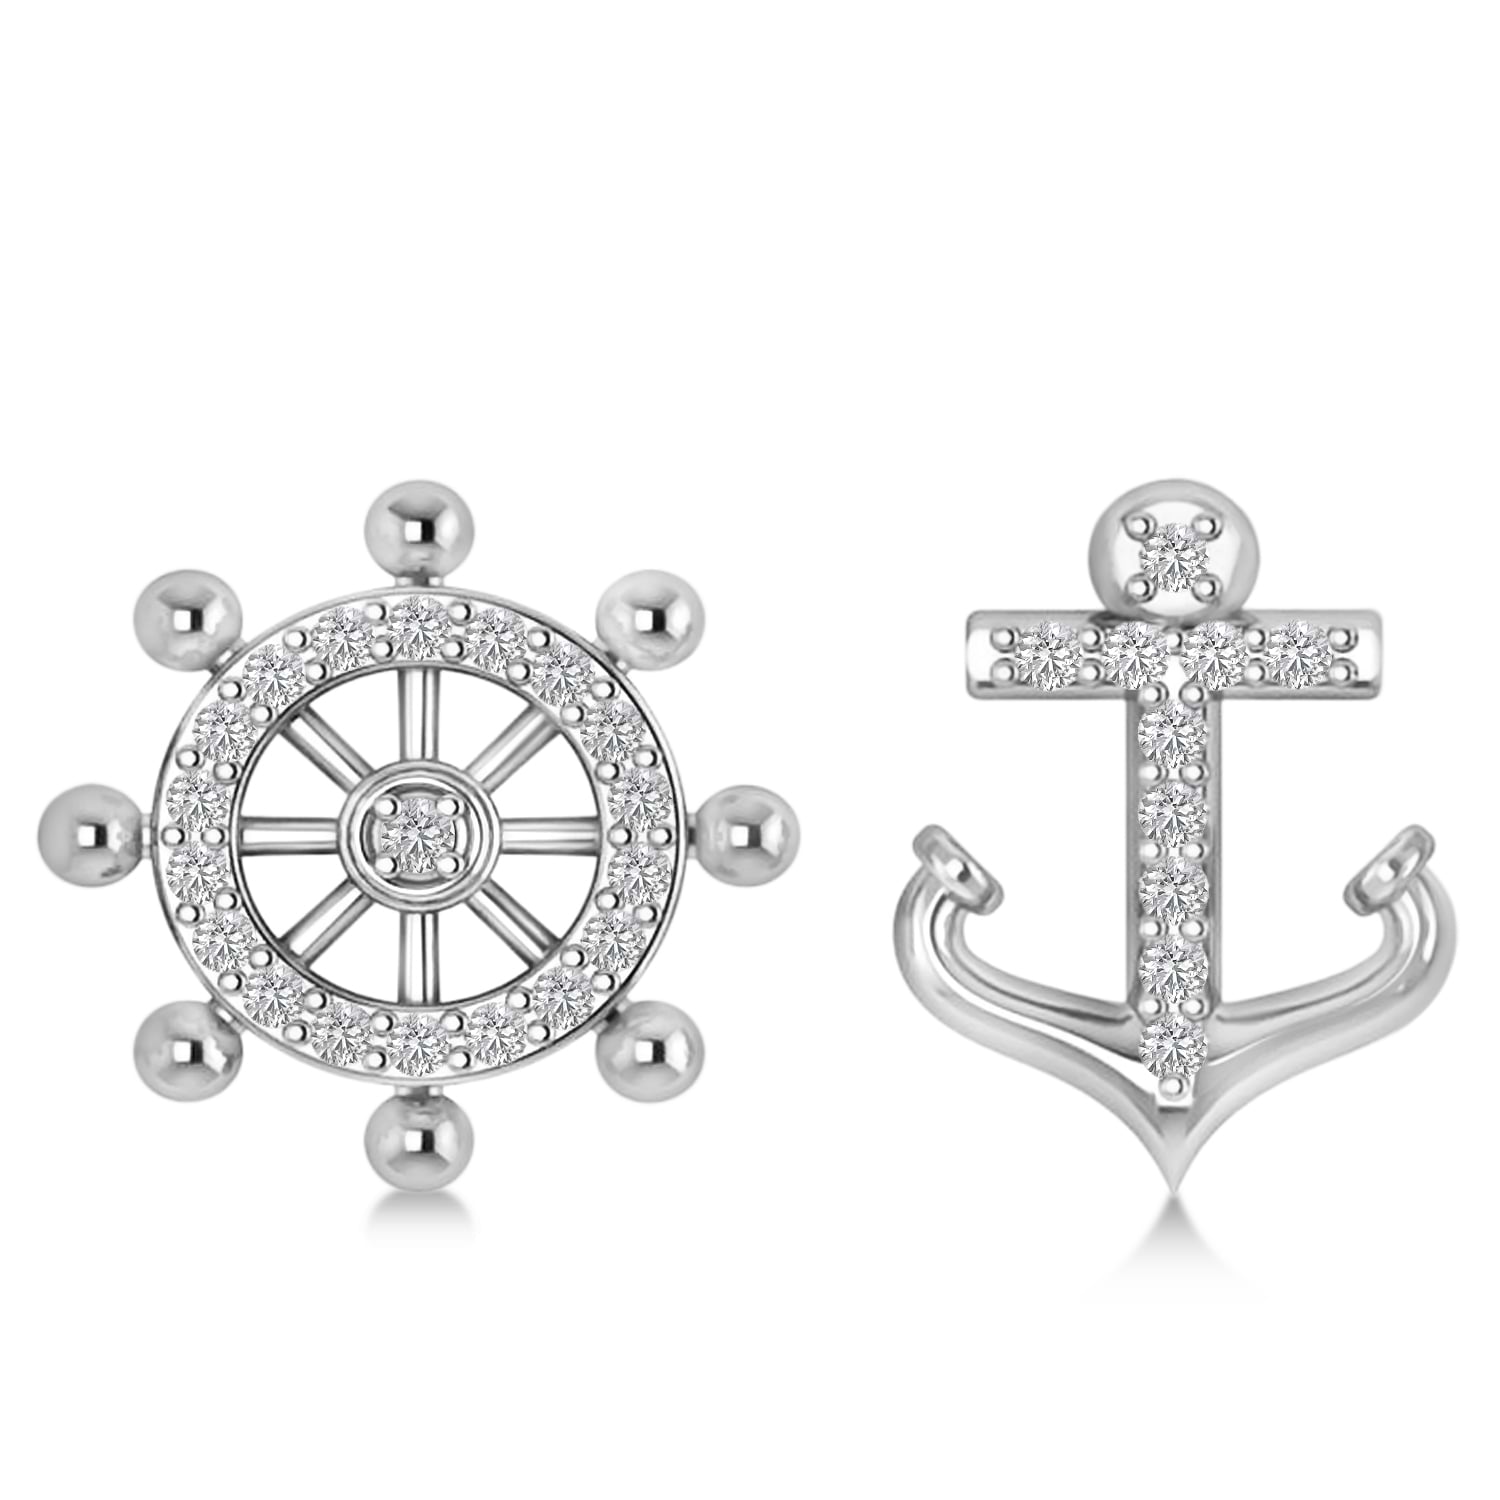 Anchor & Ship's Wheel Diamond Mismatched Earrings 14k White Gold (0.21ct)